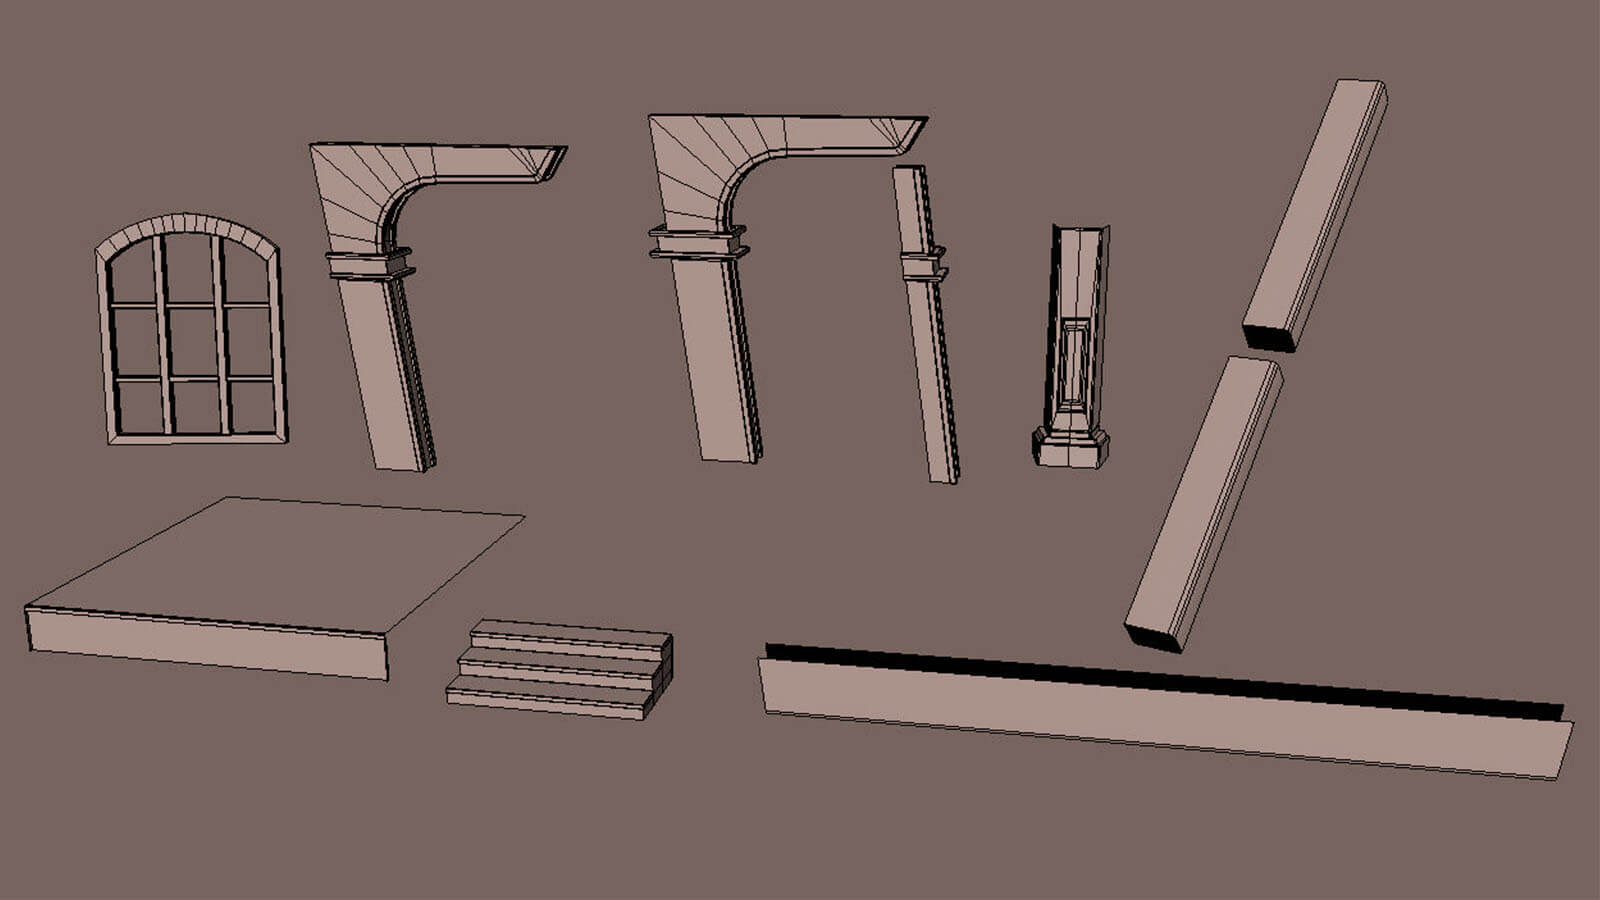 Untextured architecture 3D objects used to build the scene